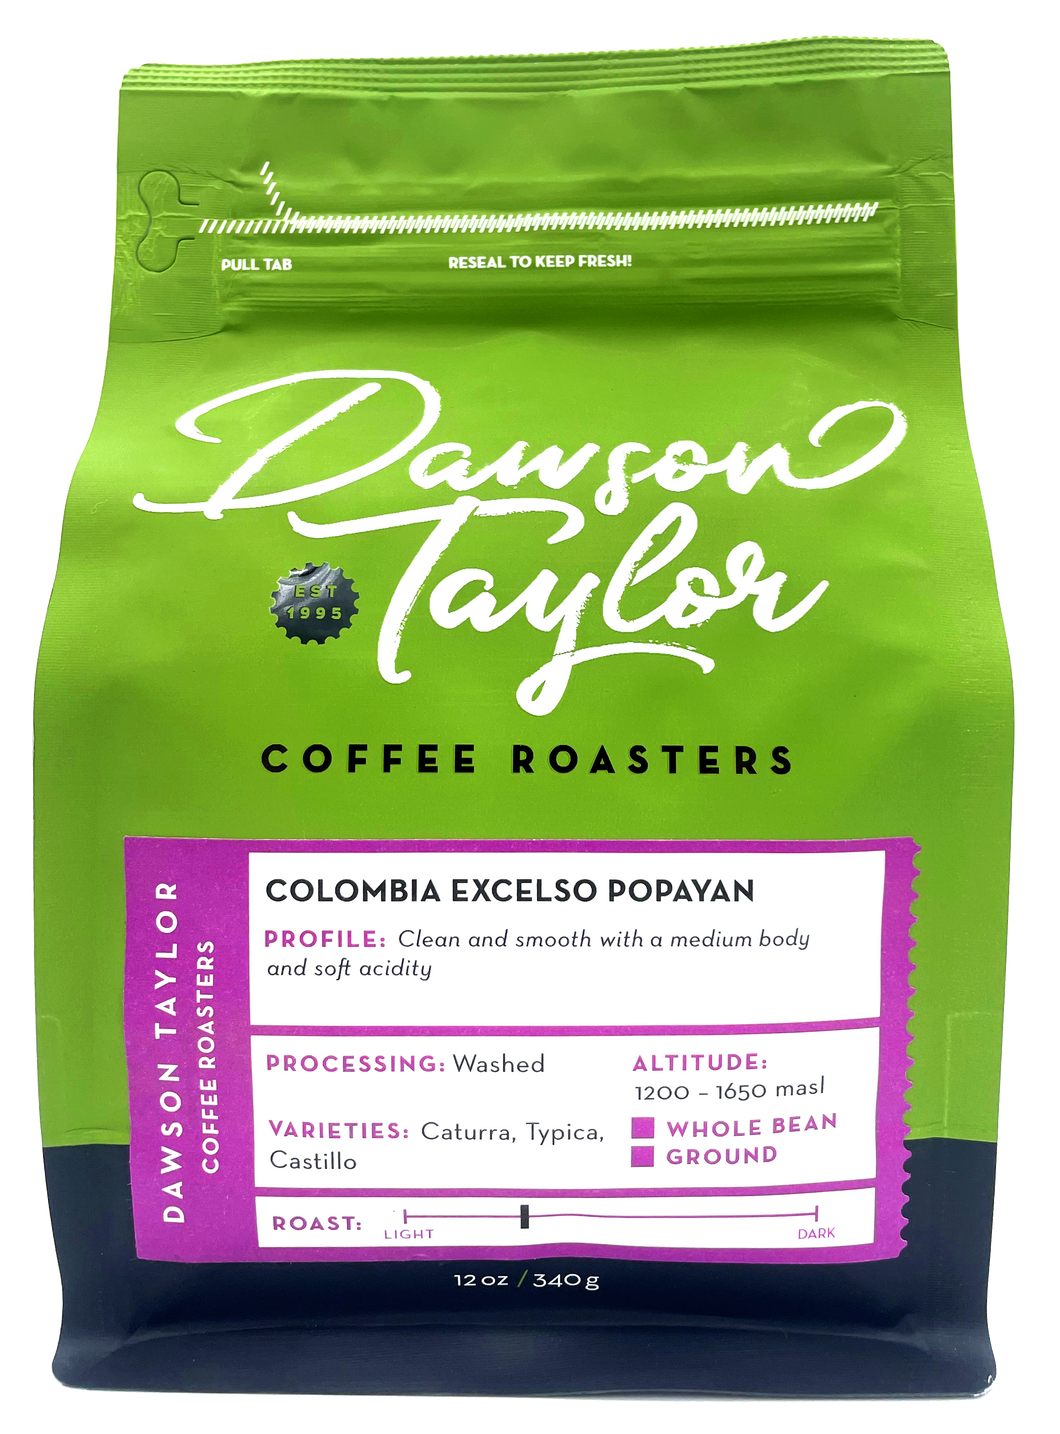 Colombia Excelso Popayan